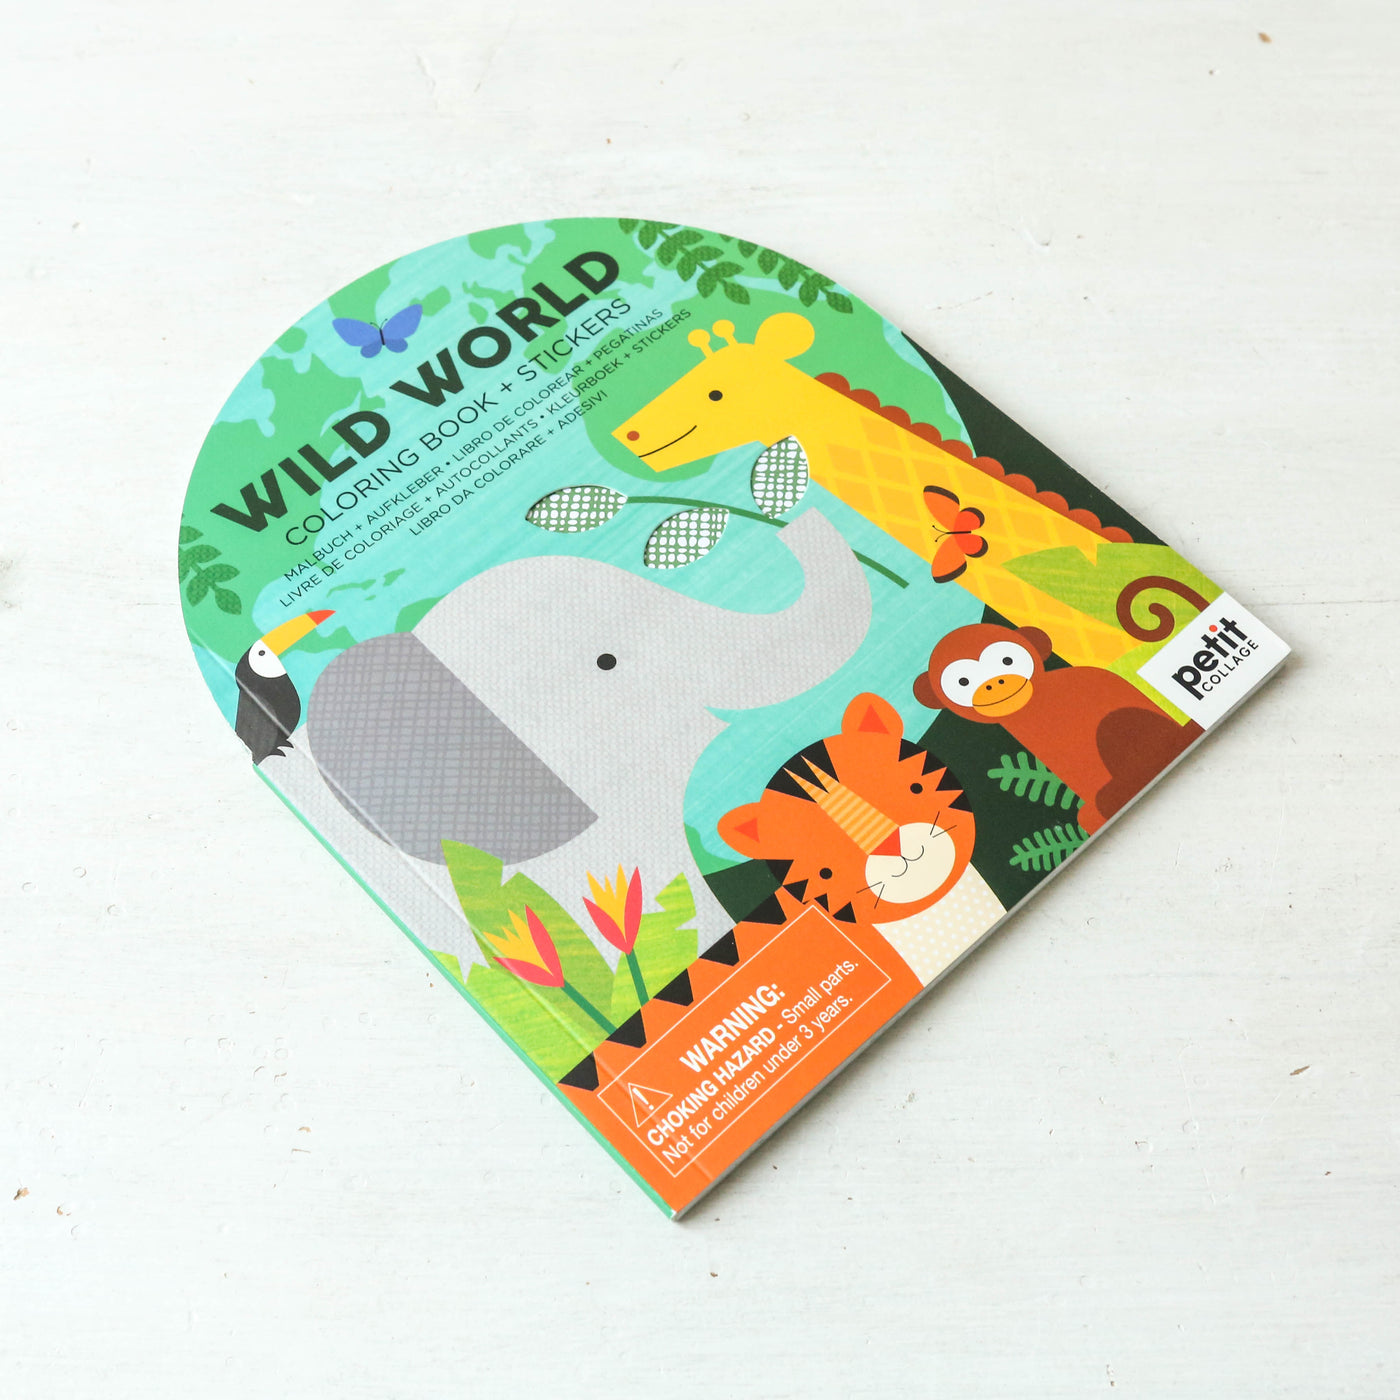 Colouring Book with Stickers - Wild World